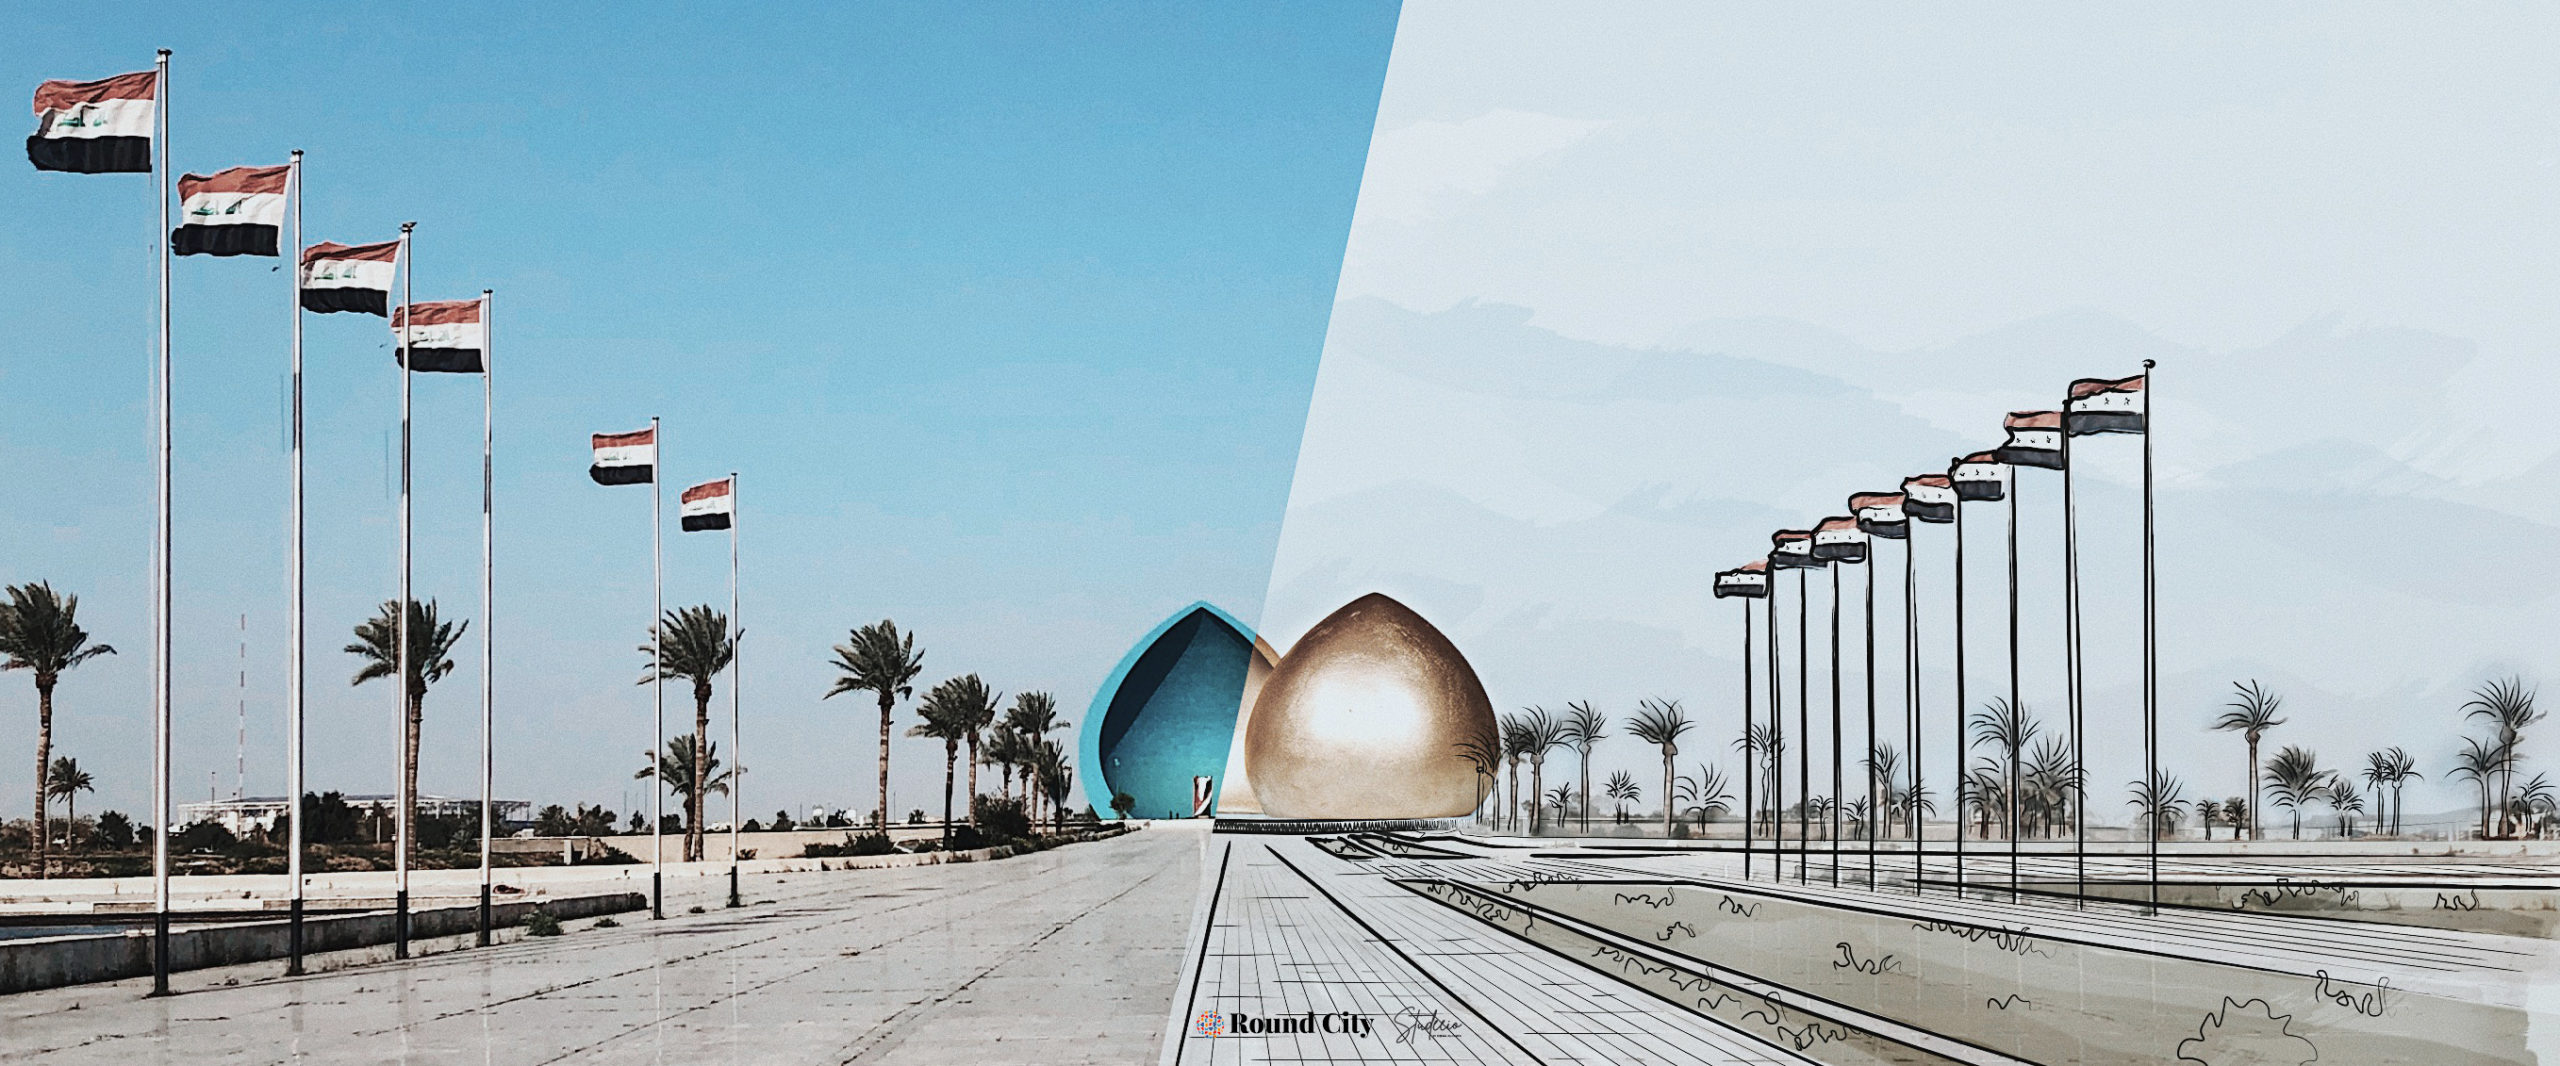 In Review: Al-Shaheed Monument, Part II - Round City